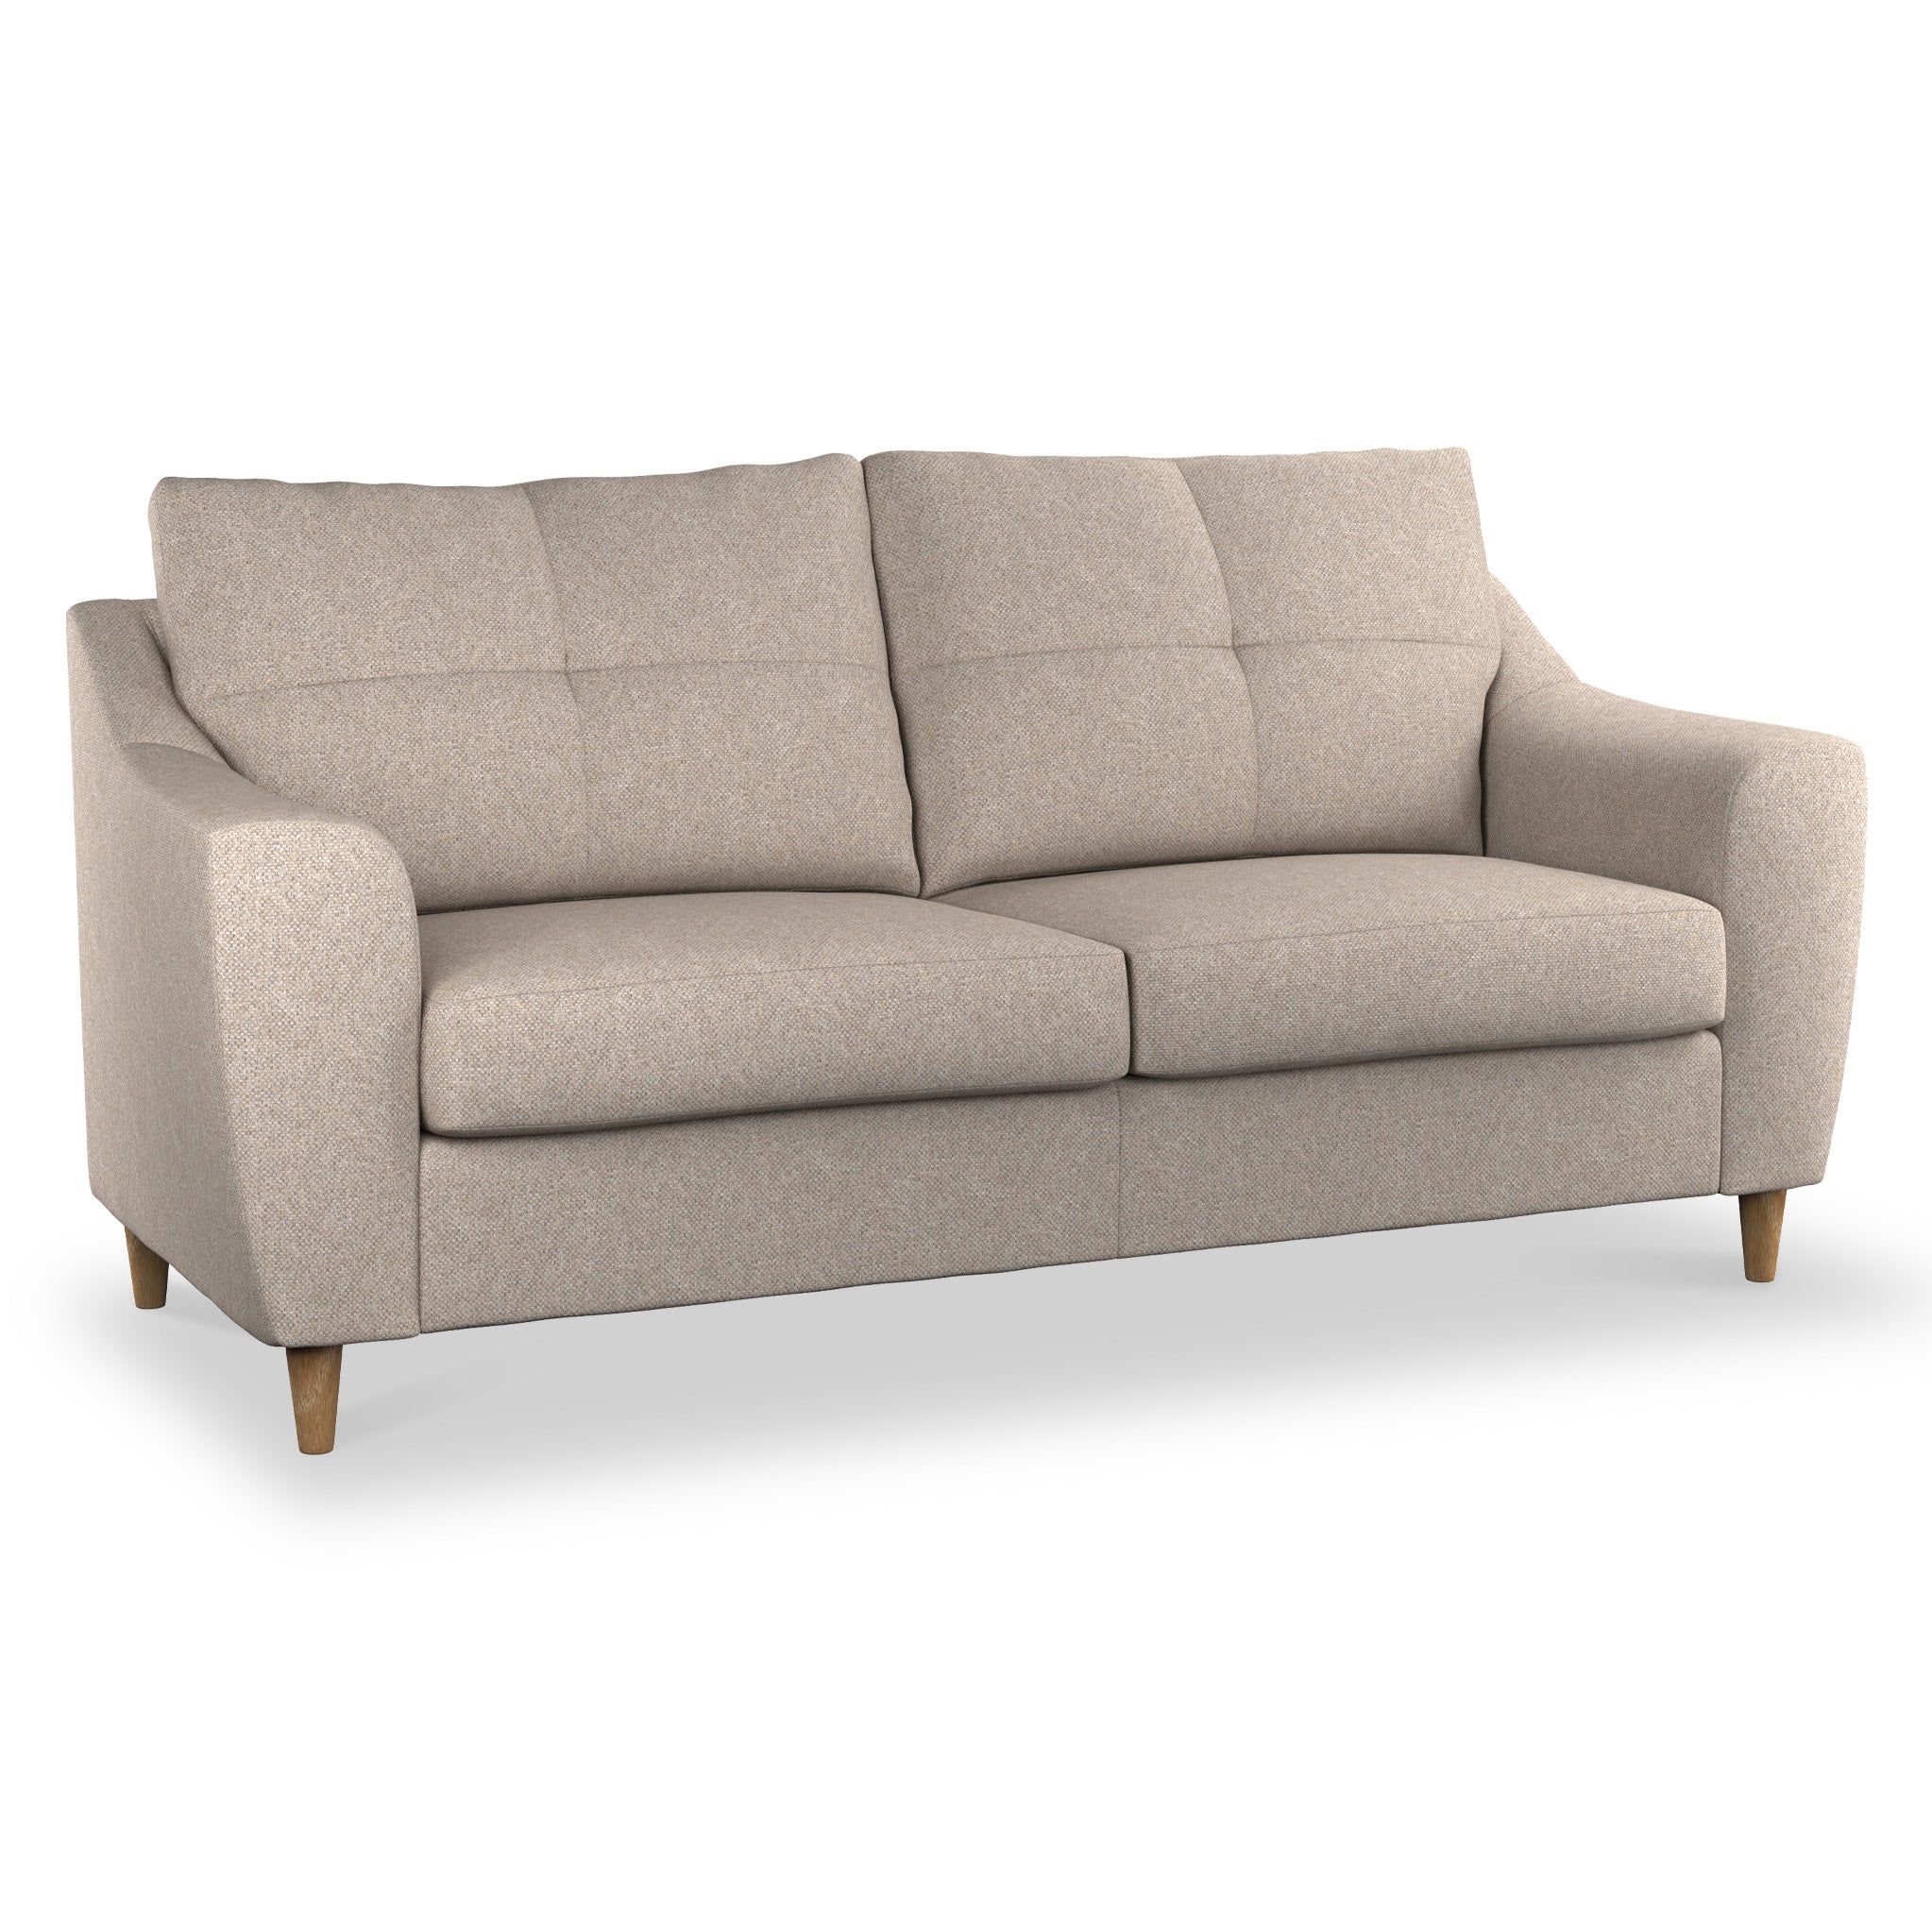 Justin 3 Seater Fabric Sofa Traditional Tufted Couch Roseland